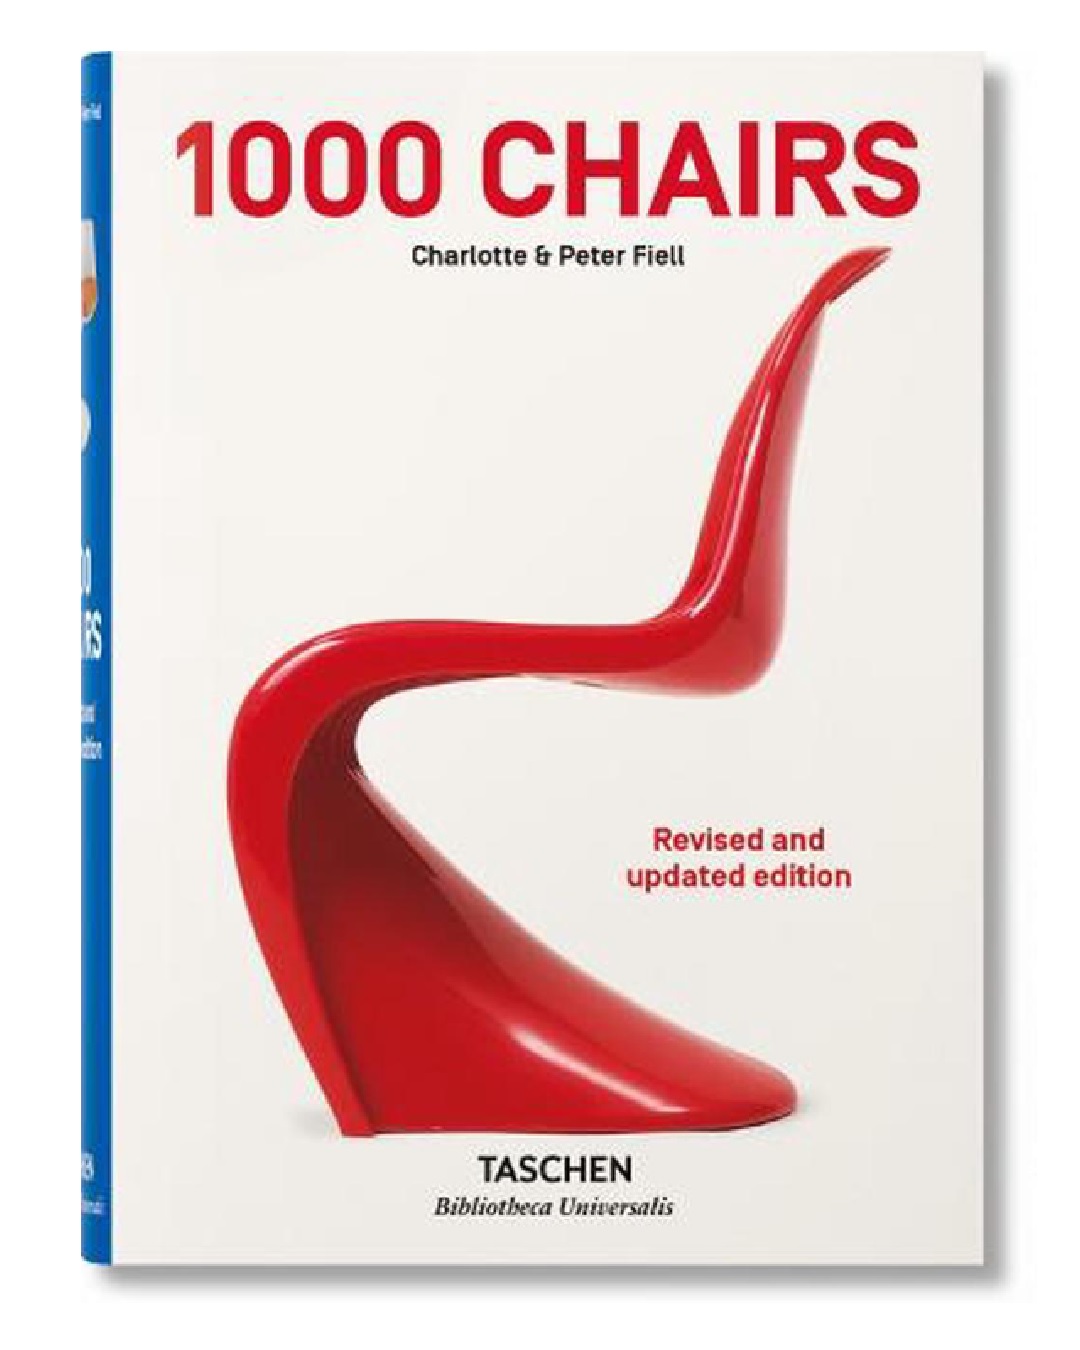 1000 chairs